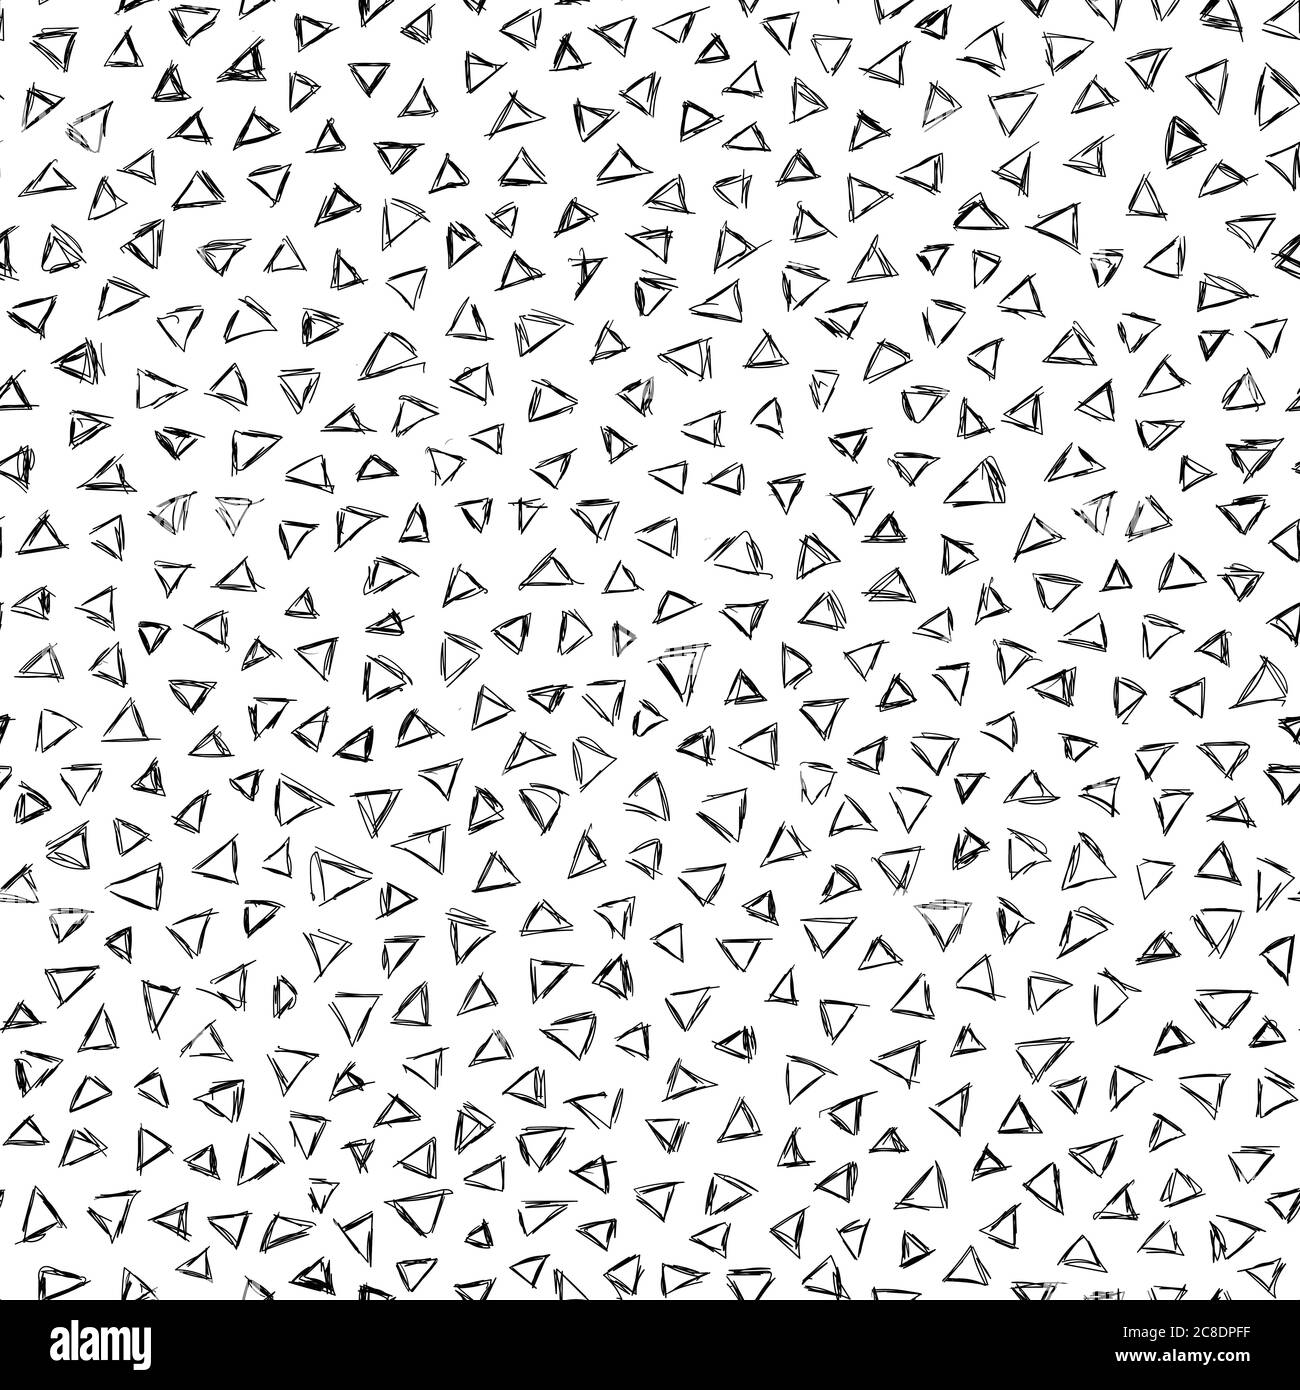 Scribble pattern. Seamless triangles background. Black and white Stock Vector